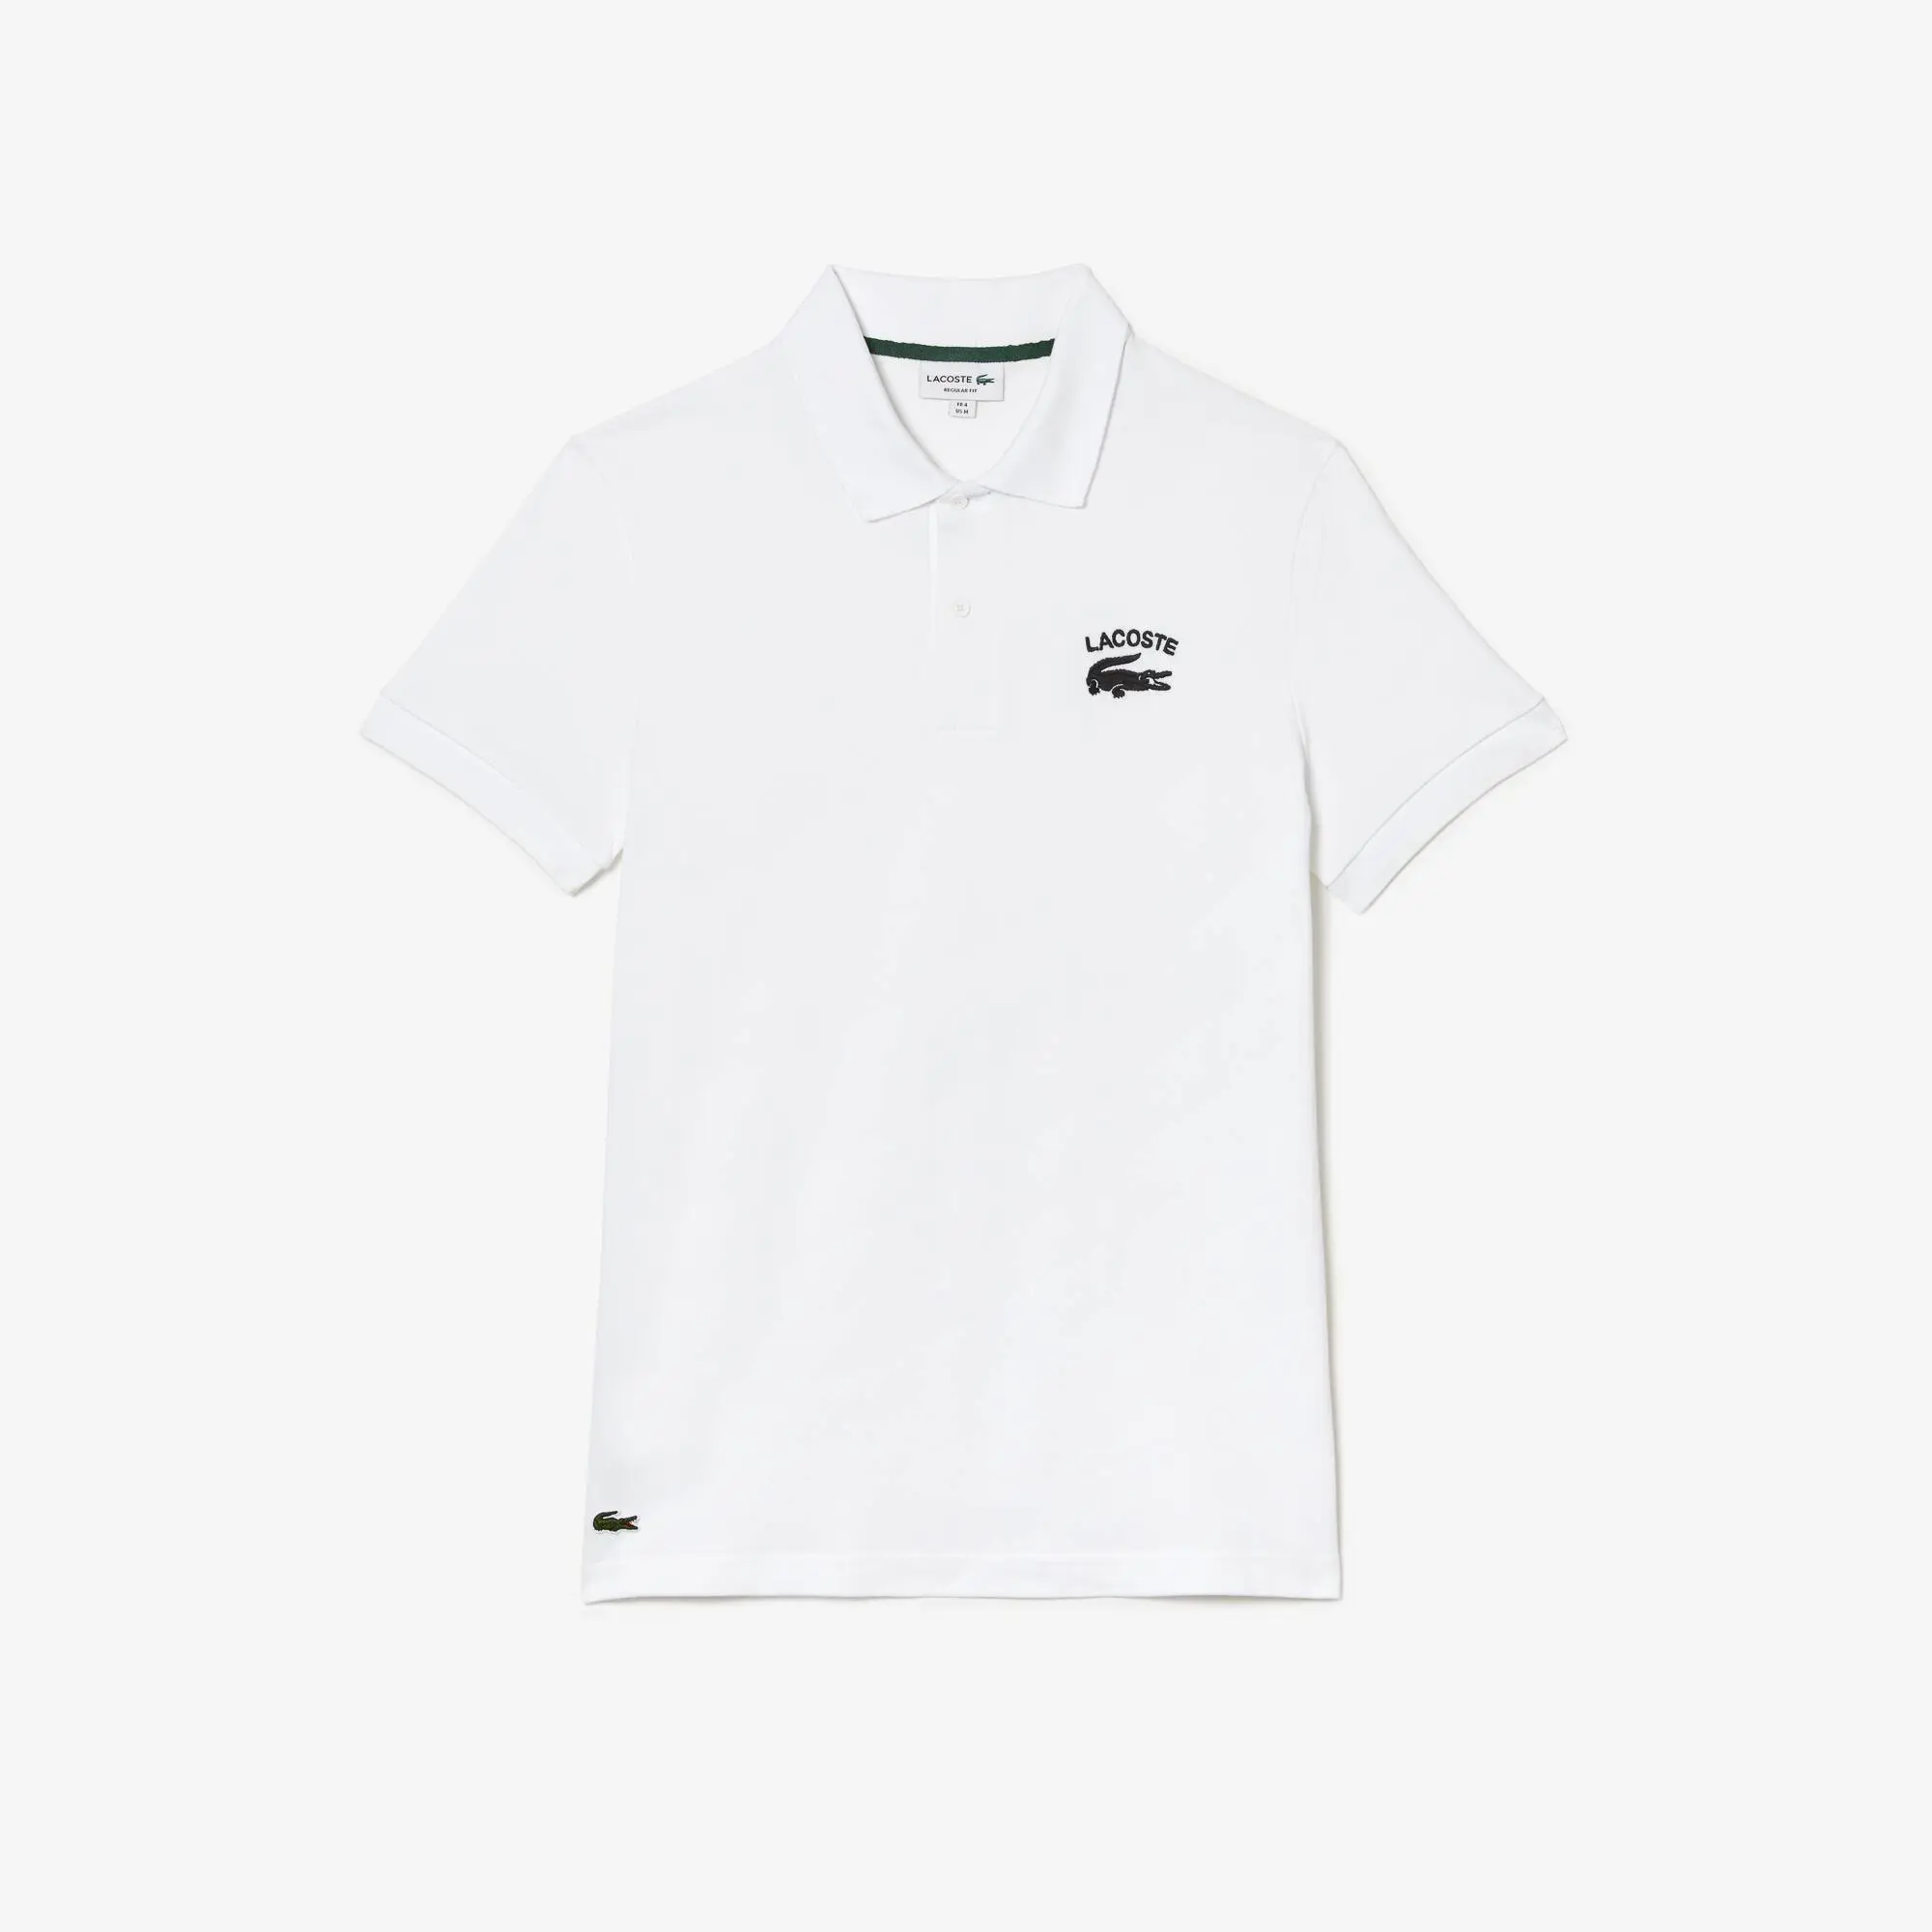 Lacoste Regular Fit Lacoste Branded Stretch Cotton Polo Shirt. 2